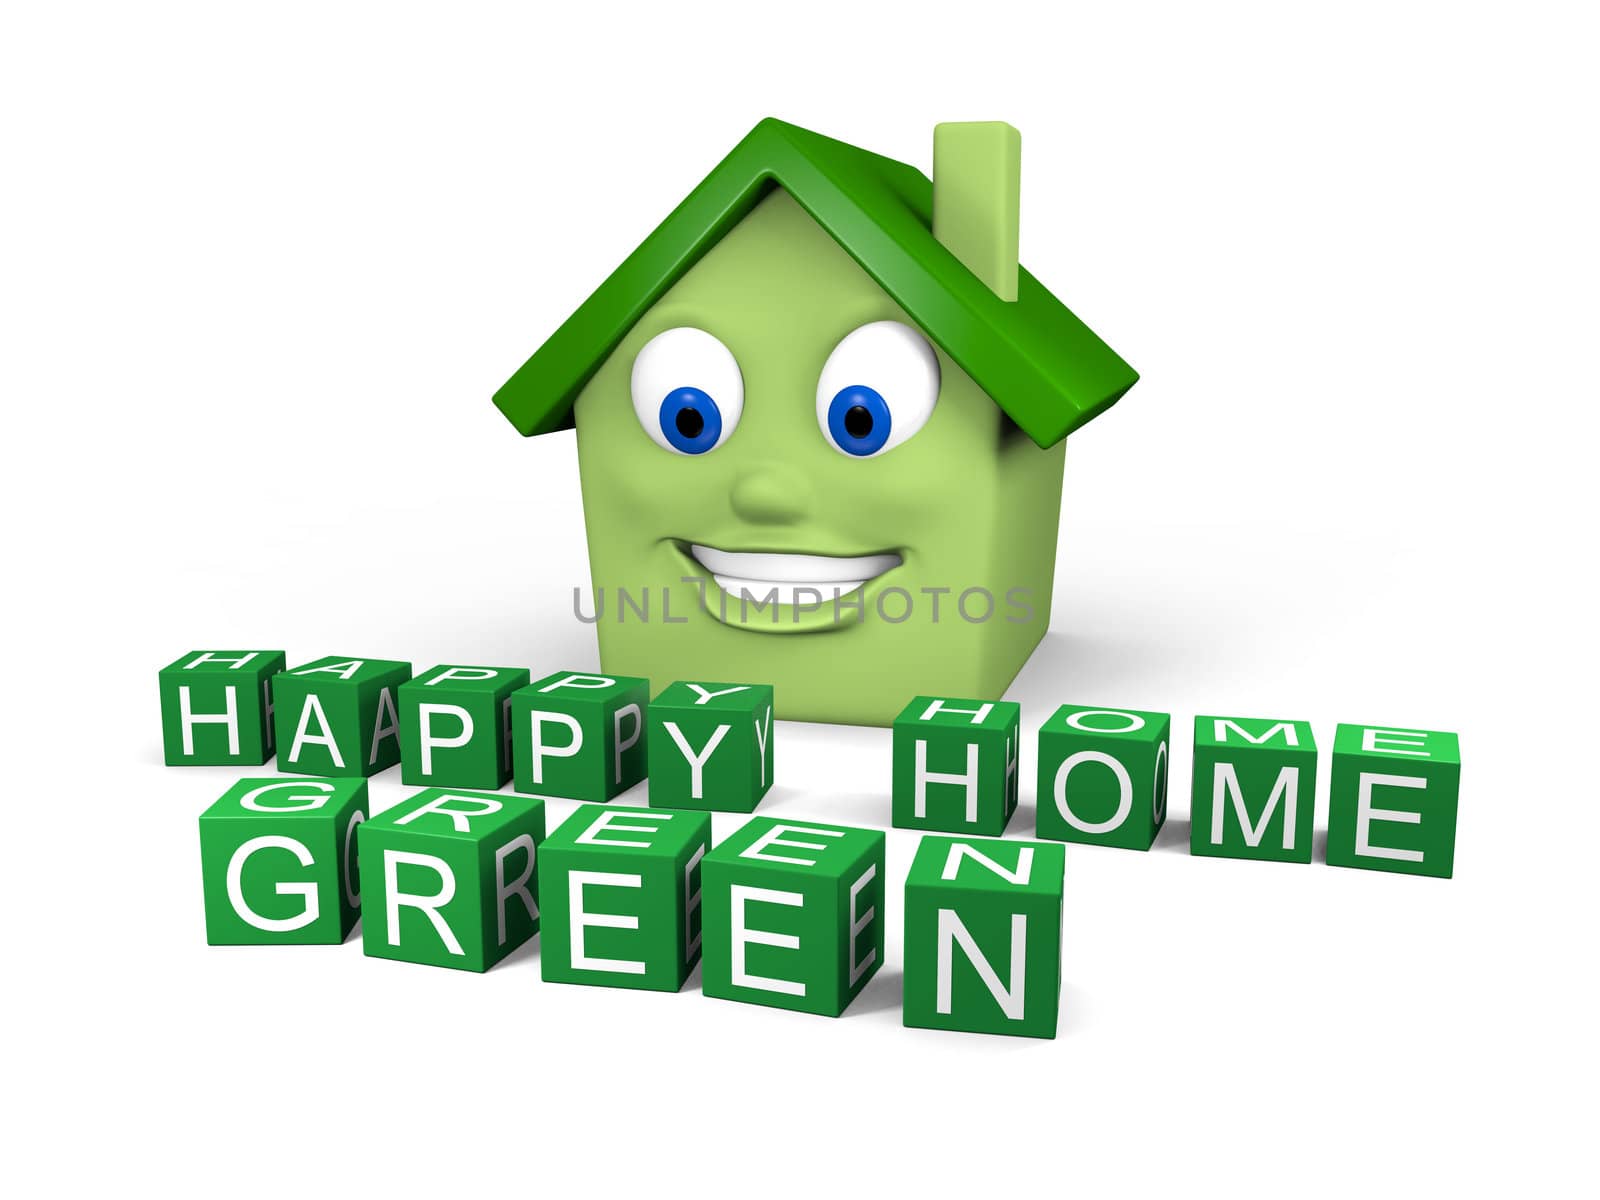 Happy Green Home by Harvepino